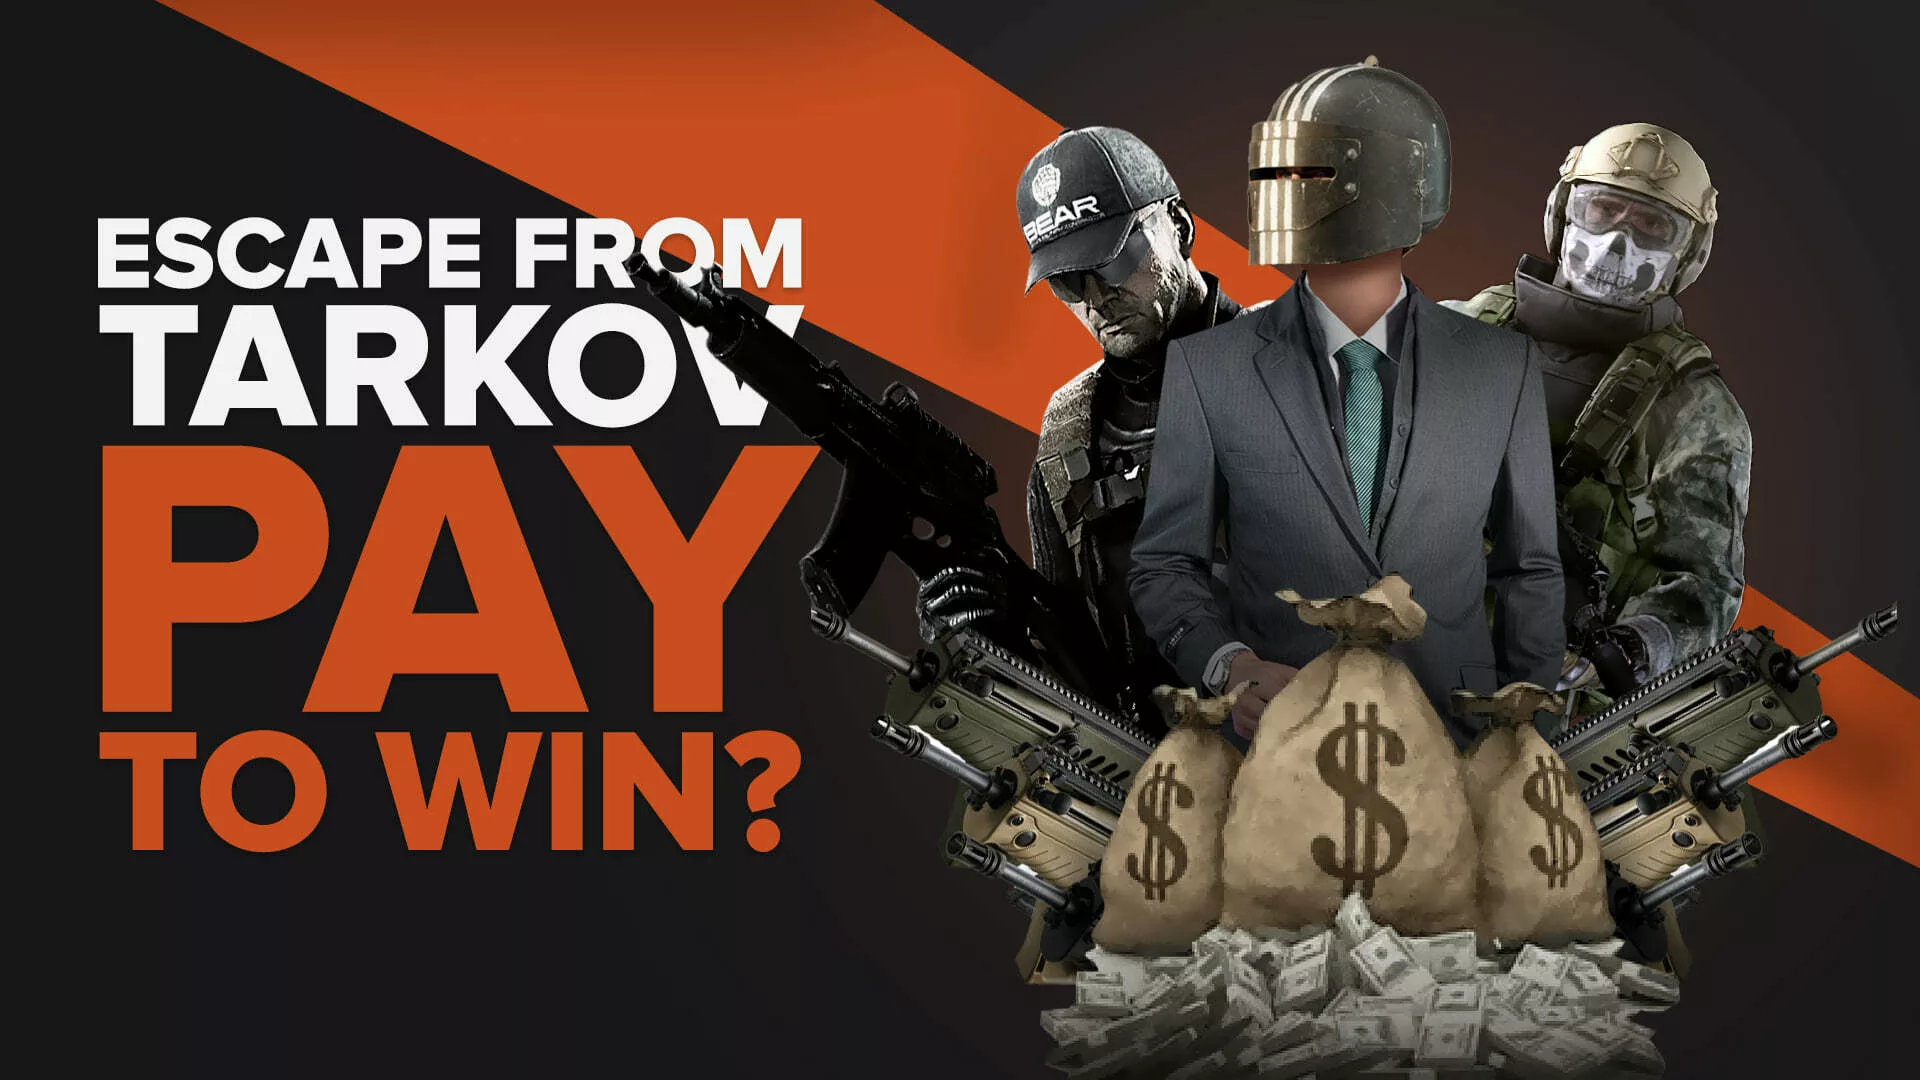 Is Escape from Tarkov Pay To Win? [The Final Answer]